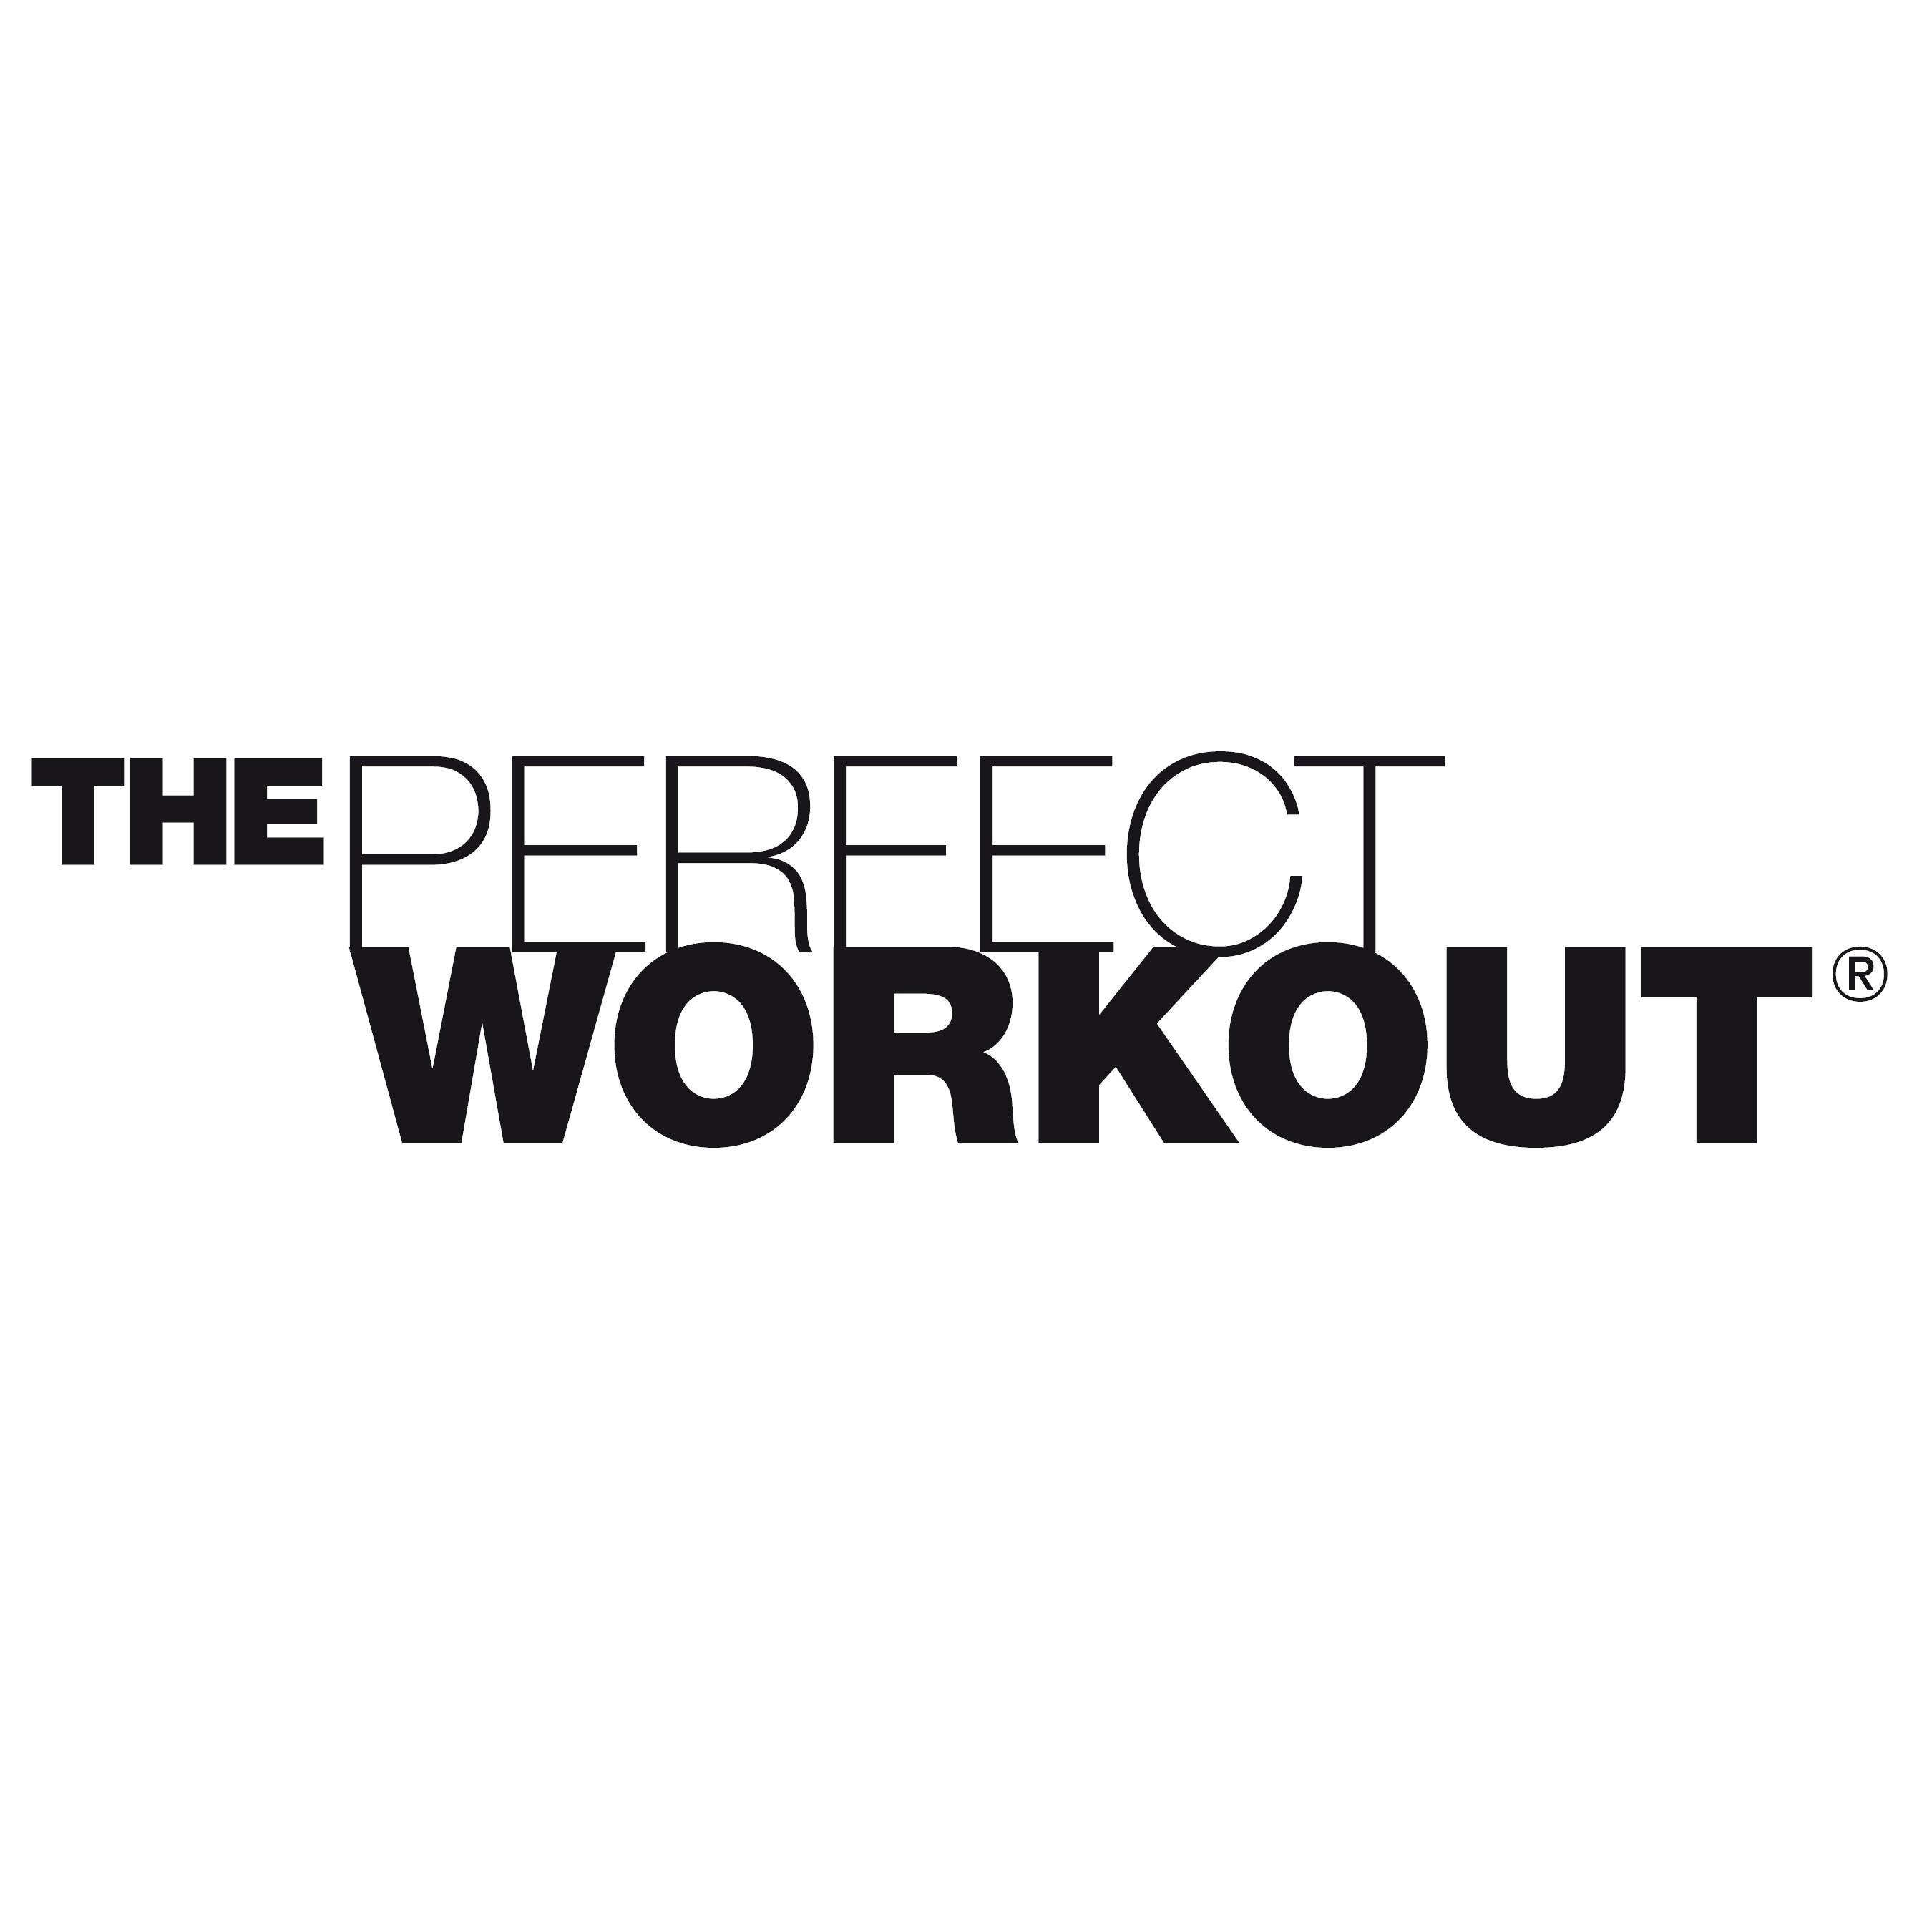 The Perfect Workout - Naperville, IL 60563 - (844)403-1120 | ShowMeLocal.com